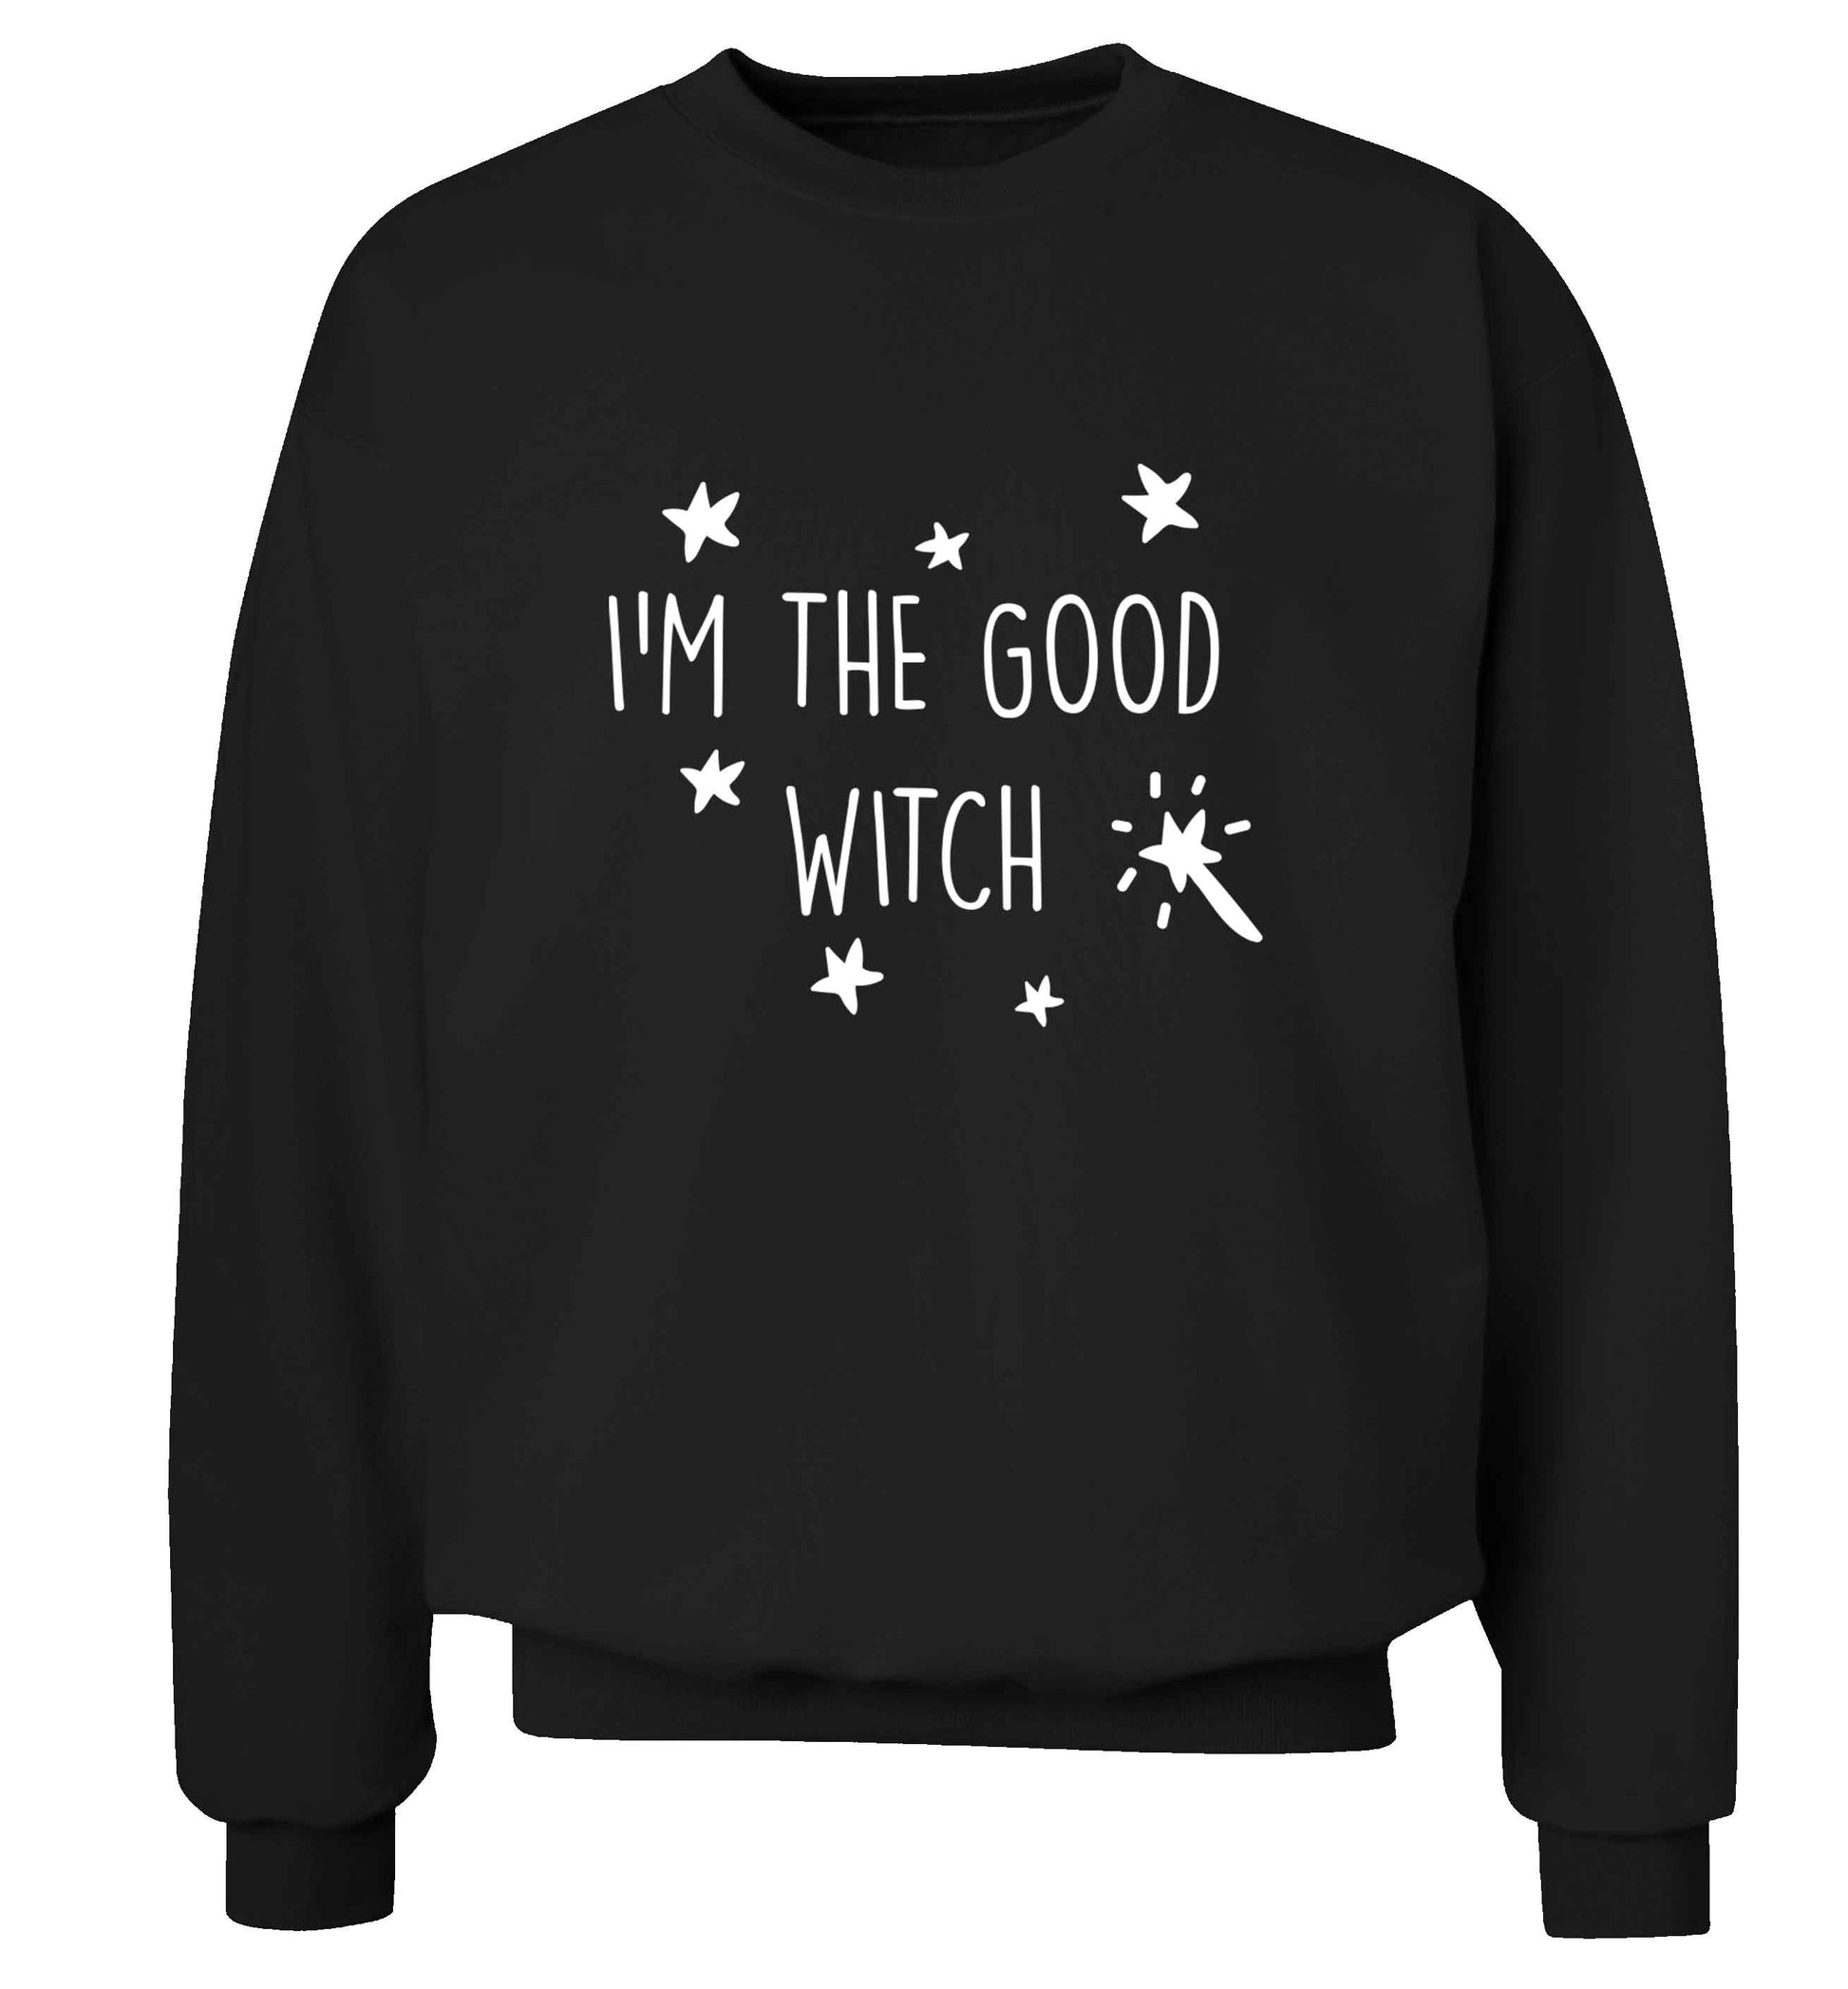 Good witch adult's unisex black sweater 2XL